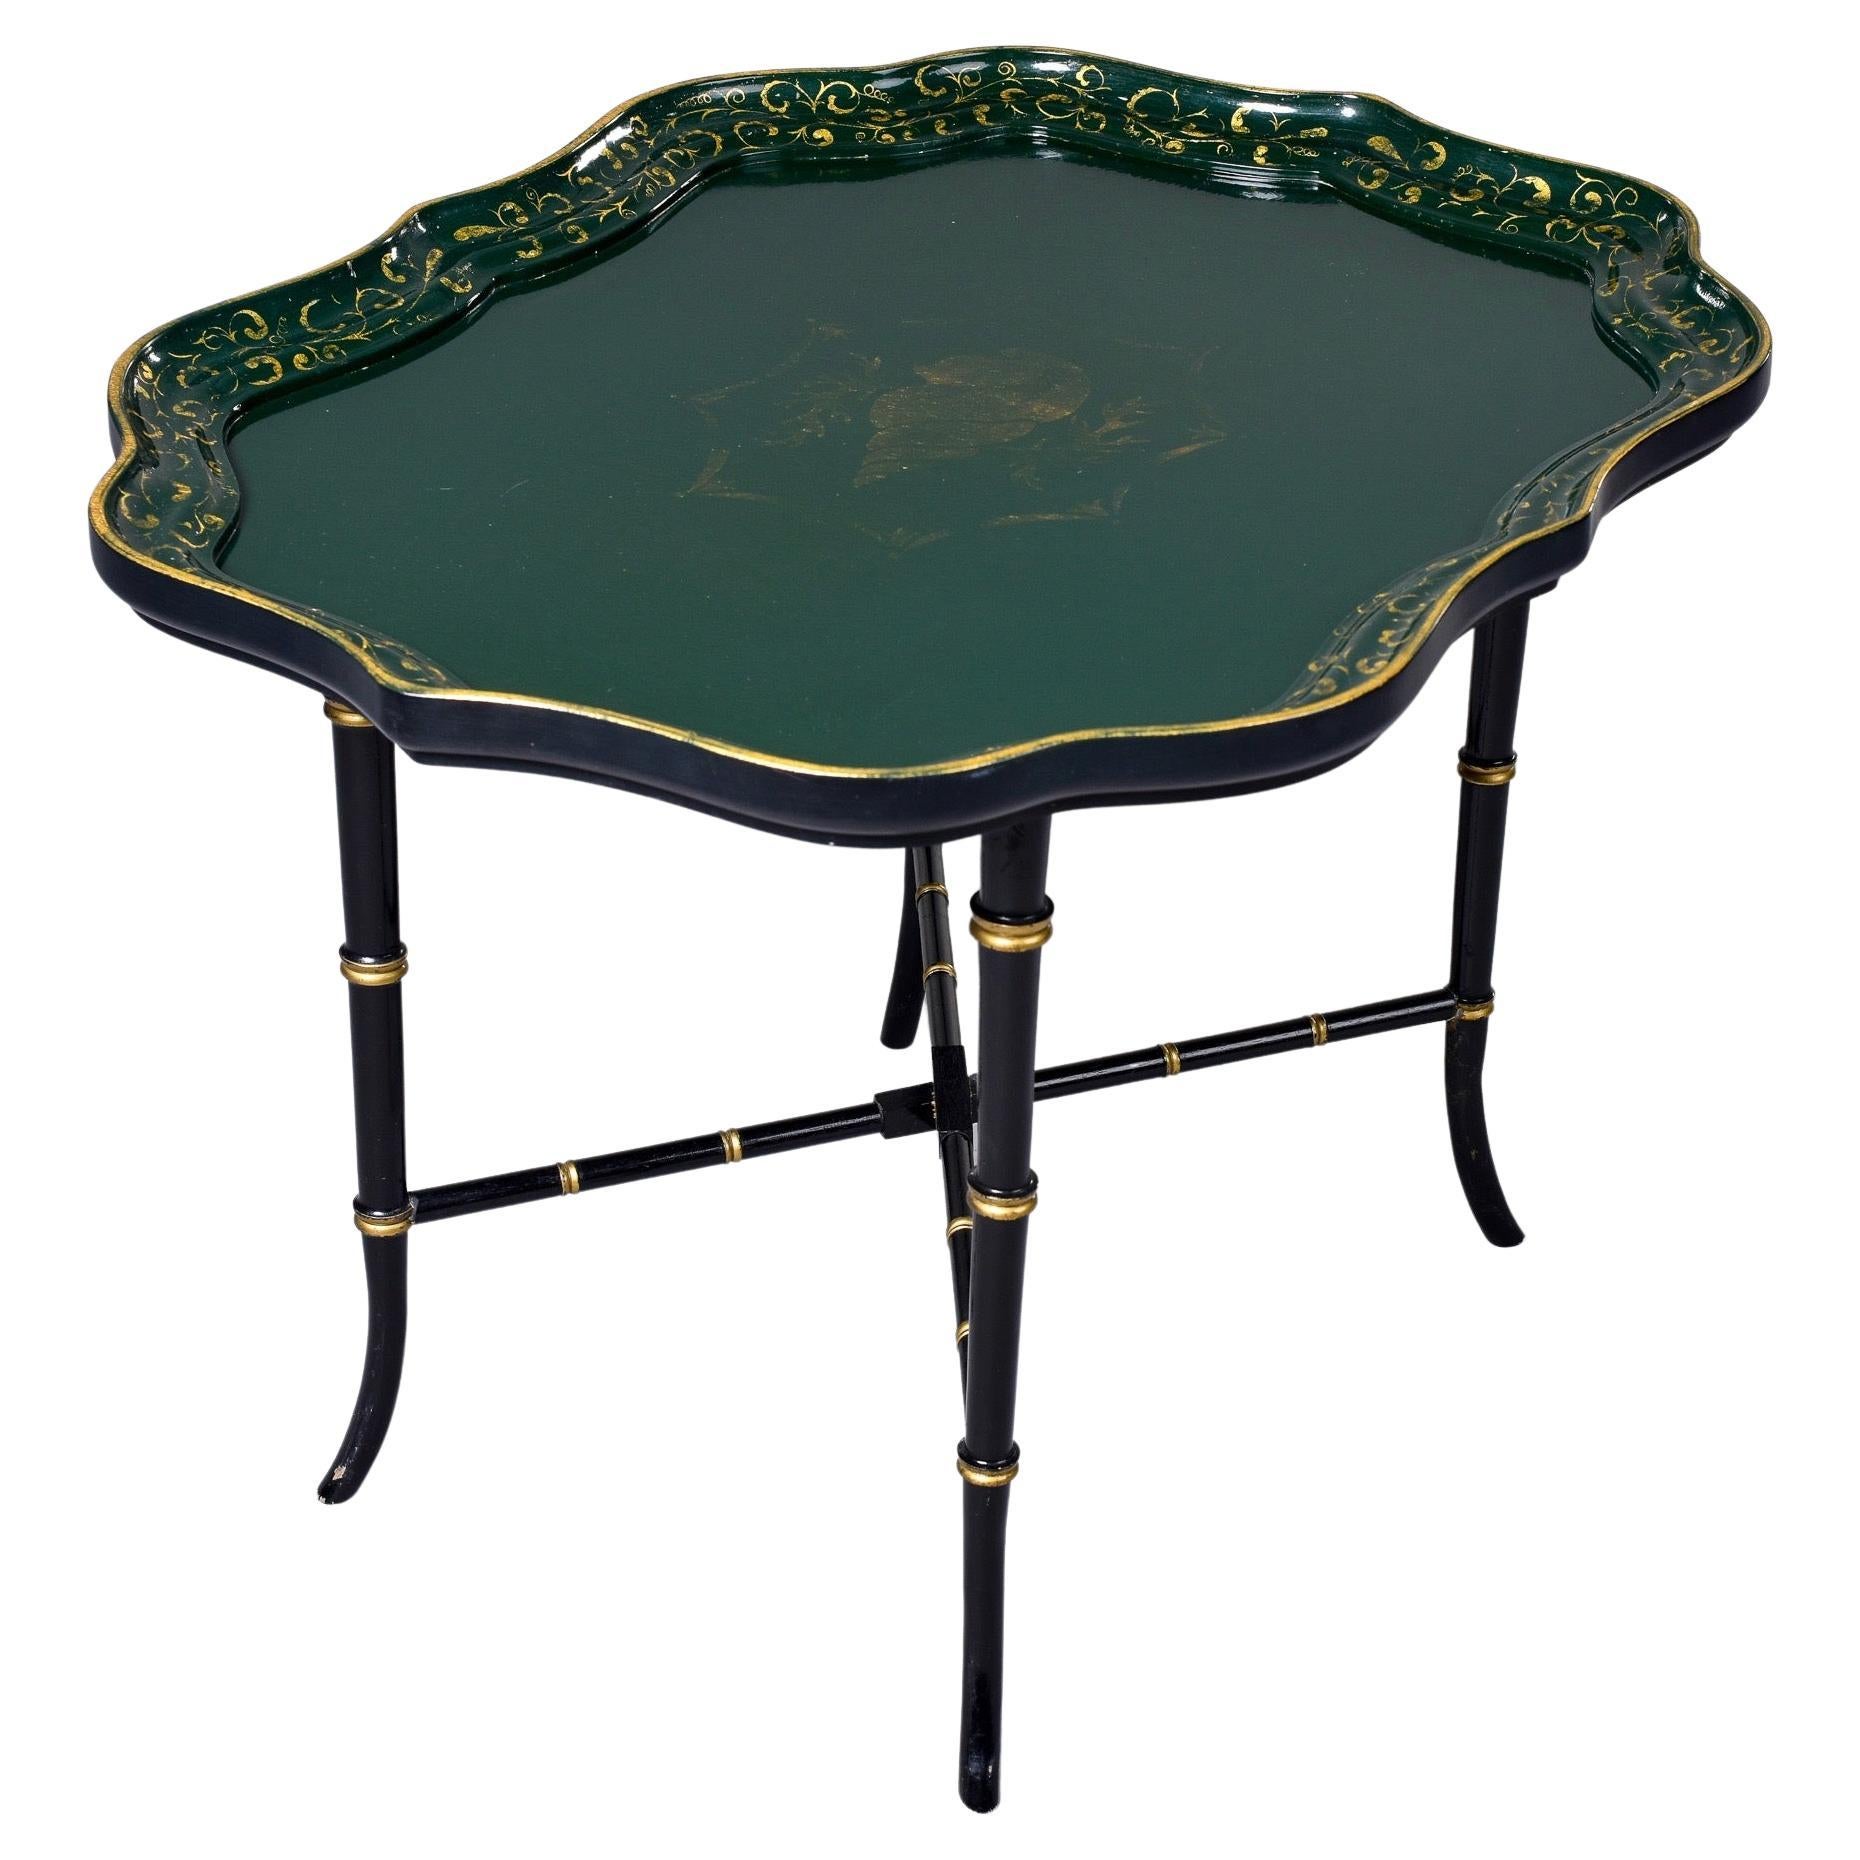 Found in England, this circa 1930s tray top table has a black and gilded faux bamboo base with an X-form stretcher. Removable tray top has a deep green painted finish with gilded painted details including a shell and seaweed vines. Unknown maker.